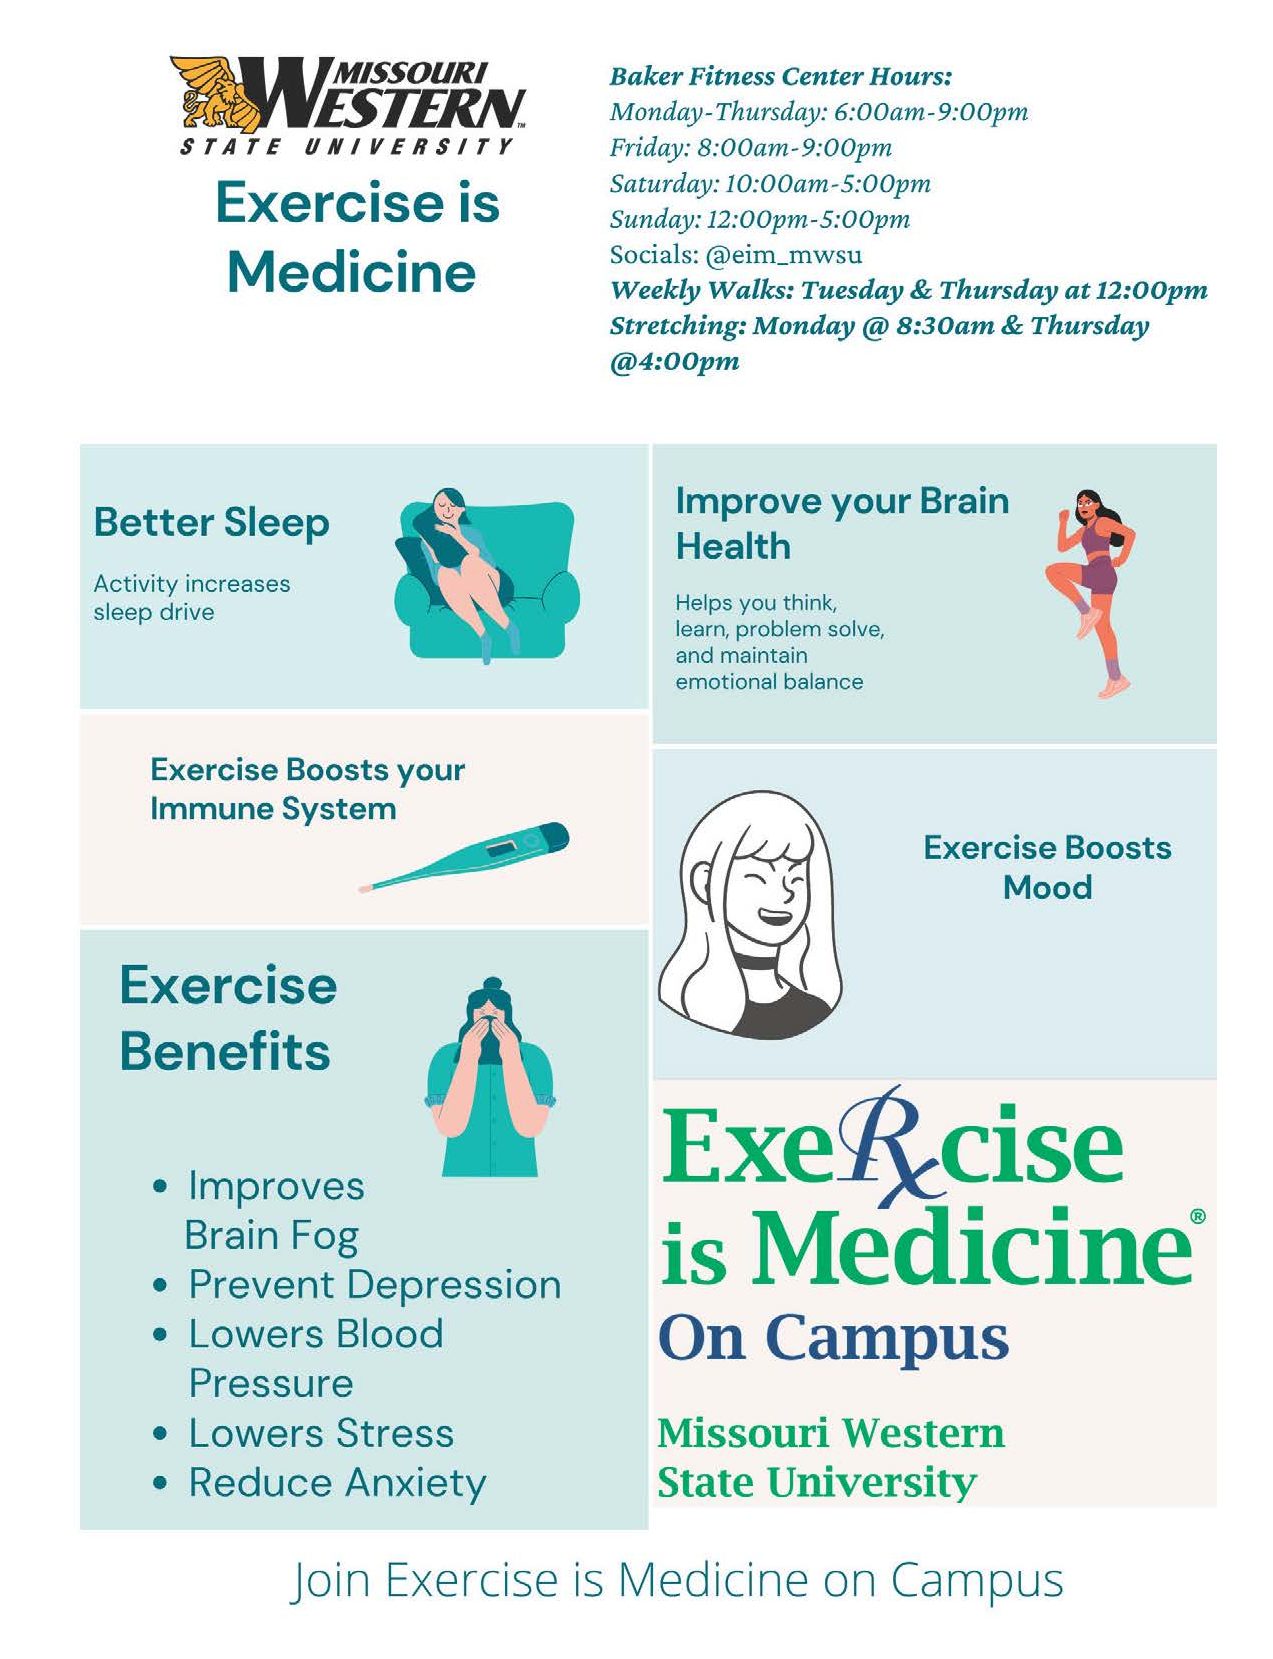 benefits-of-exercise-exercise-is-medicine-on-campus-mwsu